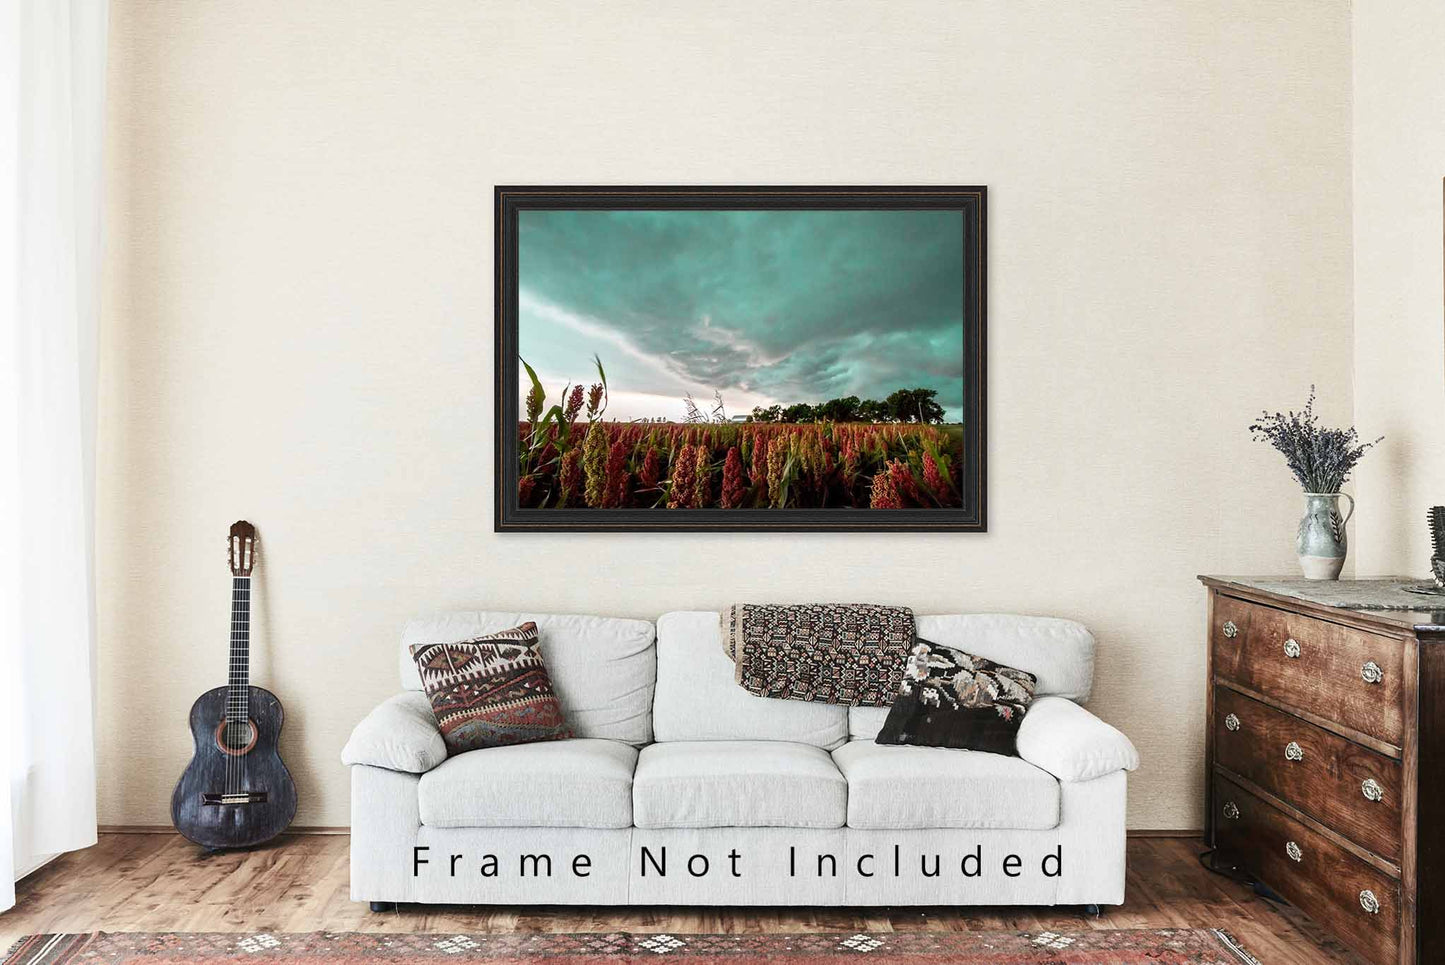 Country Photography Print - Picture of Storm Advancing Over Colorful Maize Field in Oklahoma - Farm Photo Artwork Farmhouse Decor